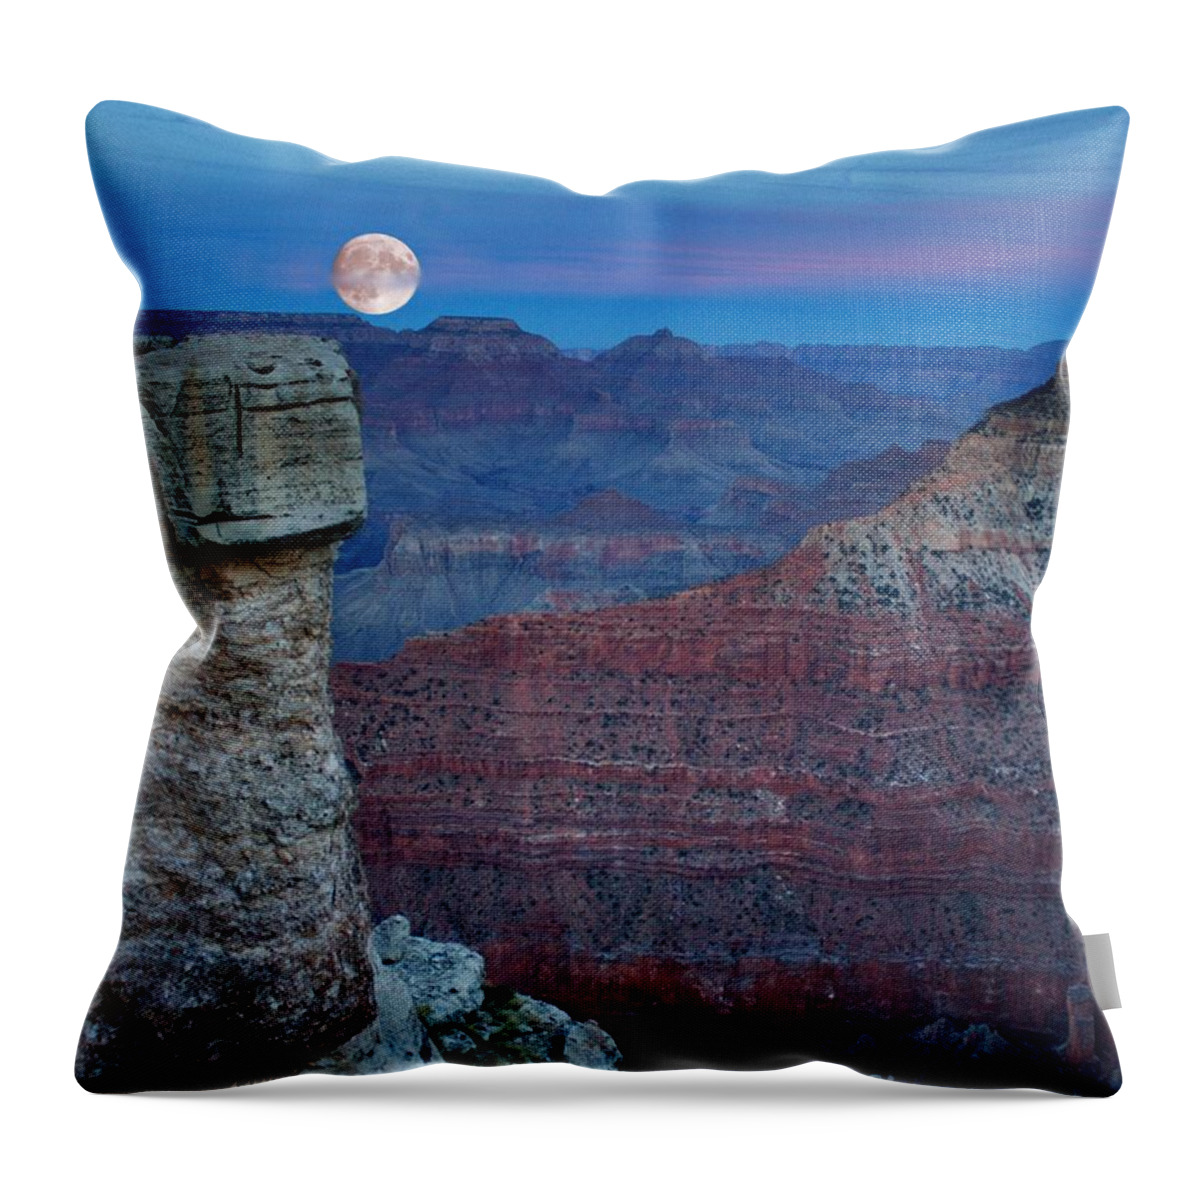 Moon Rise Grand Canyon Throw Pillow featuring the photograph Moon Rise Grand Canyon by Patrick Witz